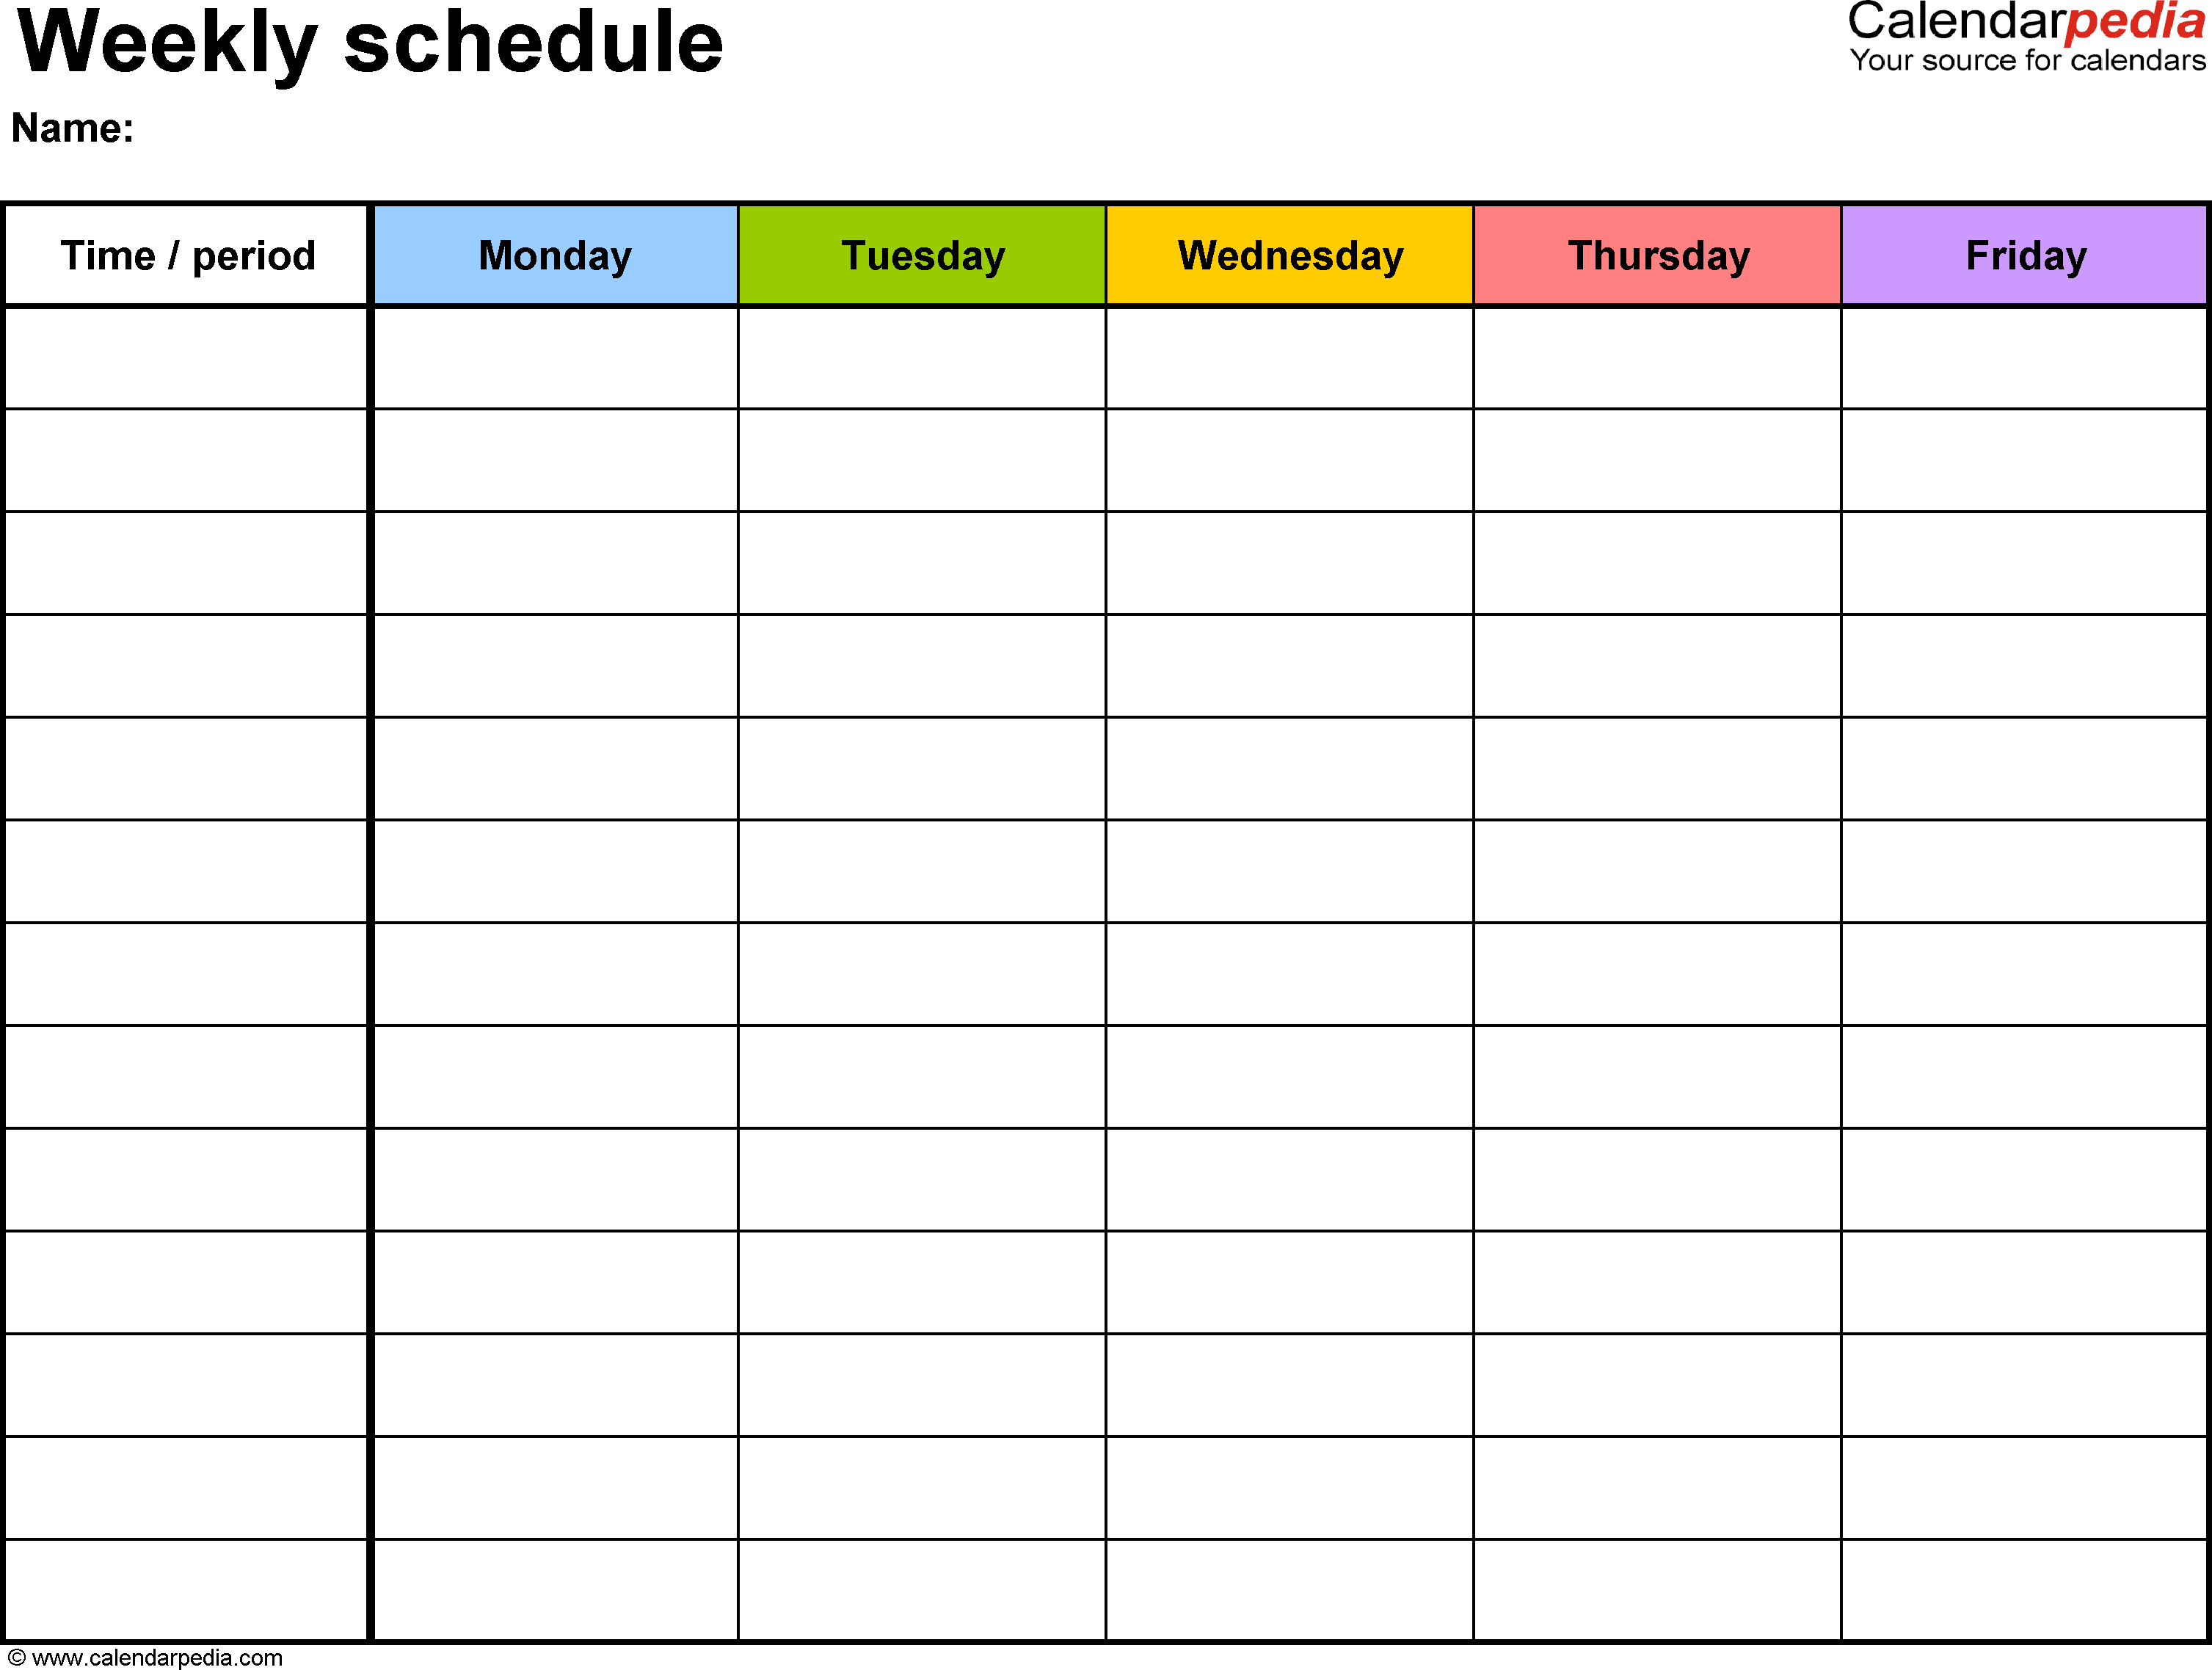 Free Weekly Schedule Templates For Word - 18 Templates within Employee Schedule Format